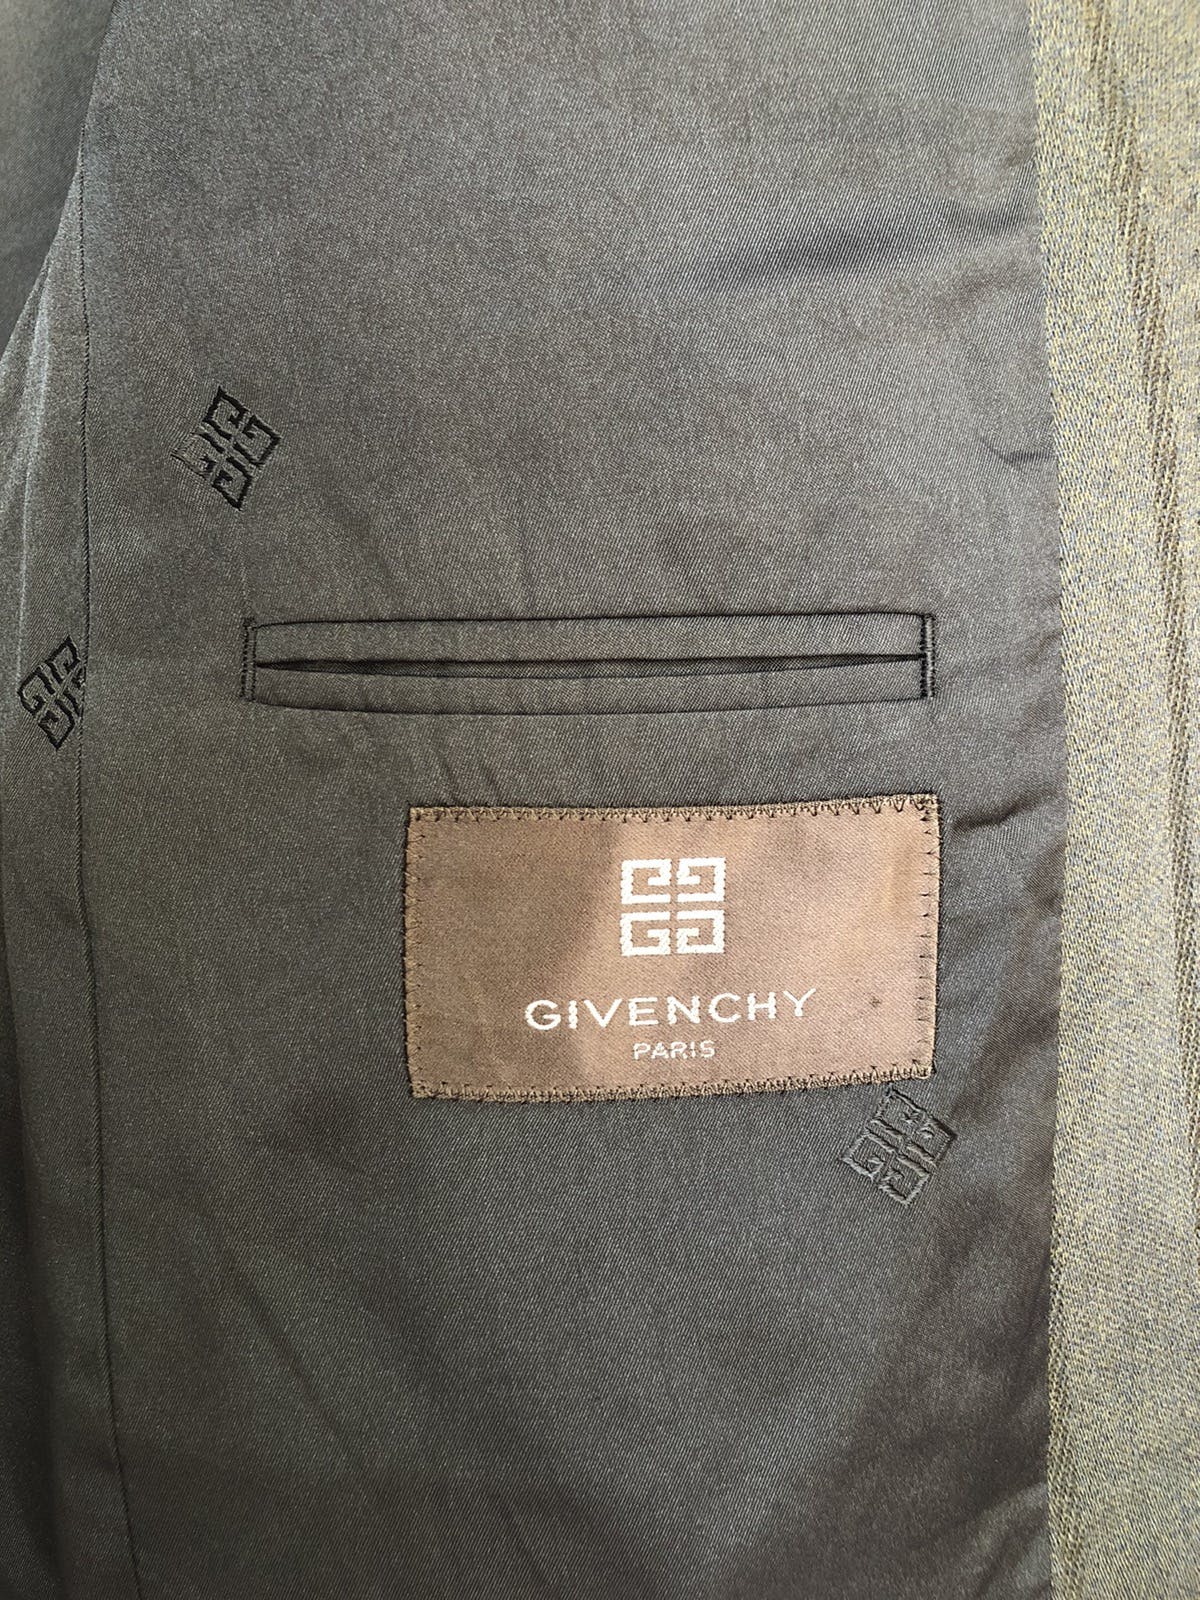 Givenchy Men’s tailored jackets good condition - 9